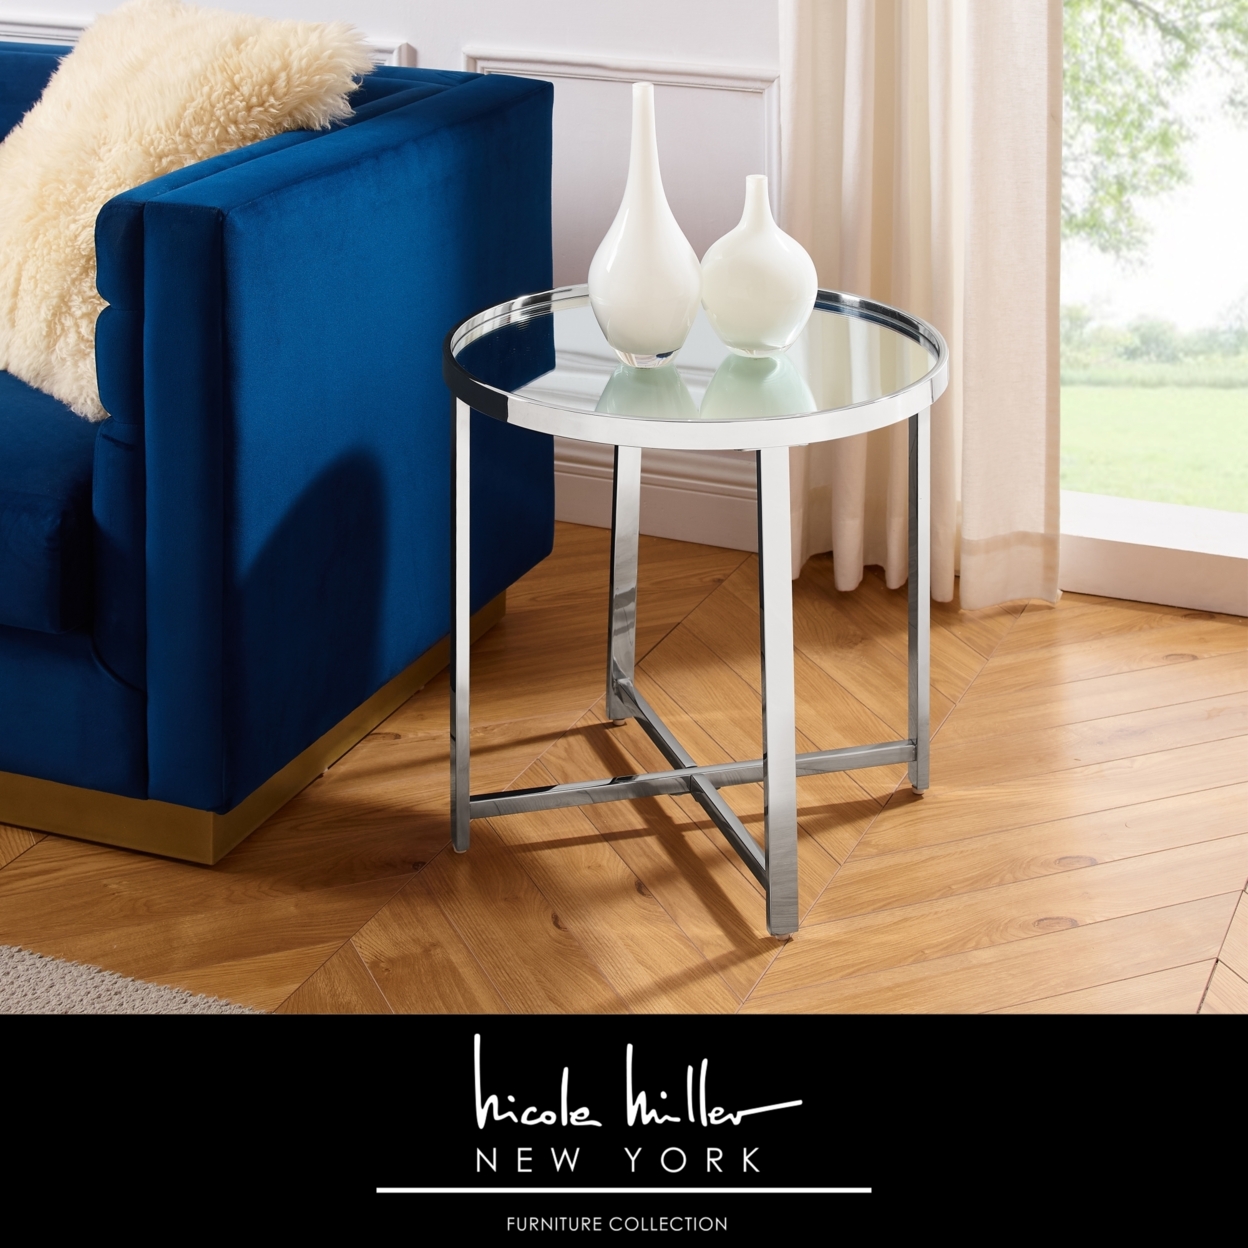 Clarity Table - Mirrored Top, Cross Legs Design, Open Geometric Base - End Table, Chrome